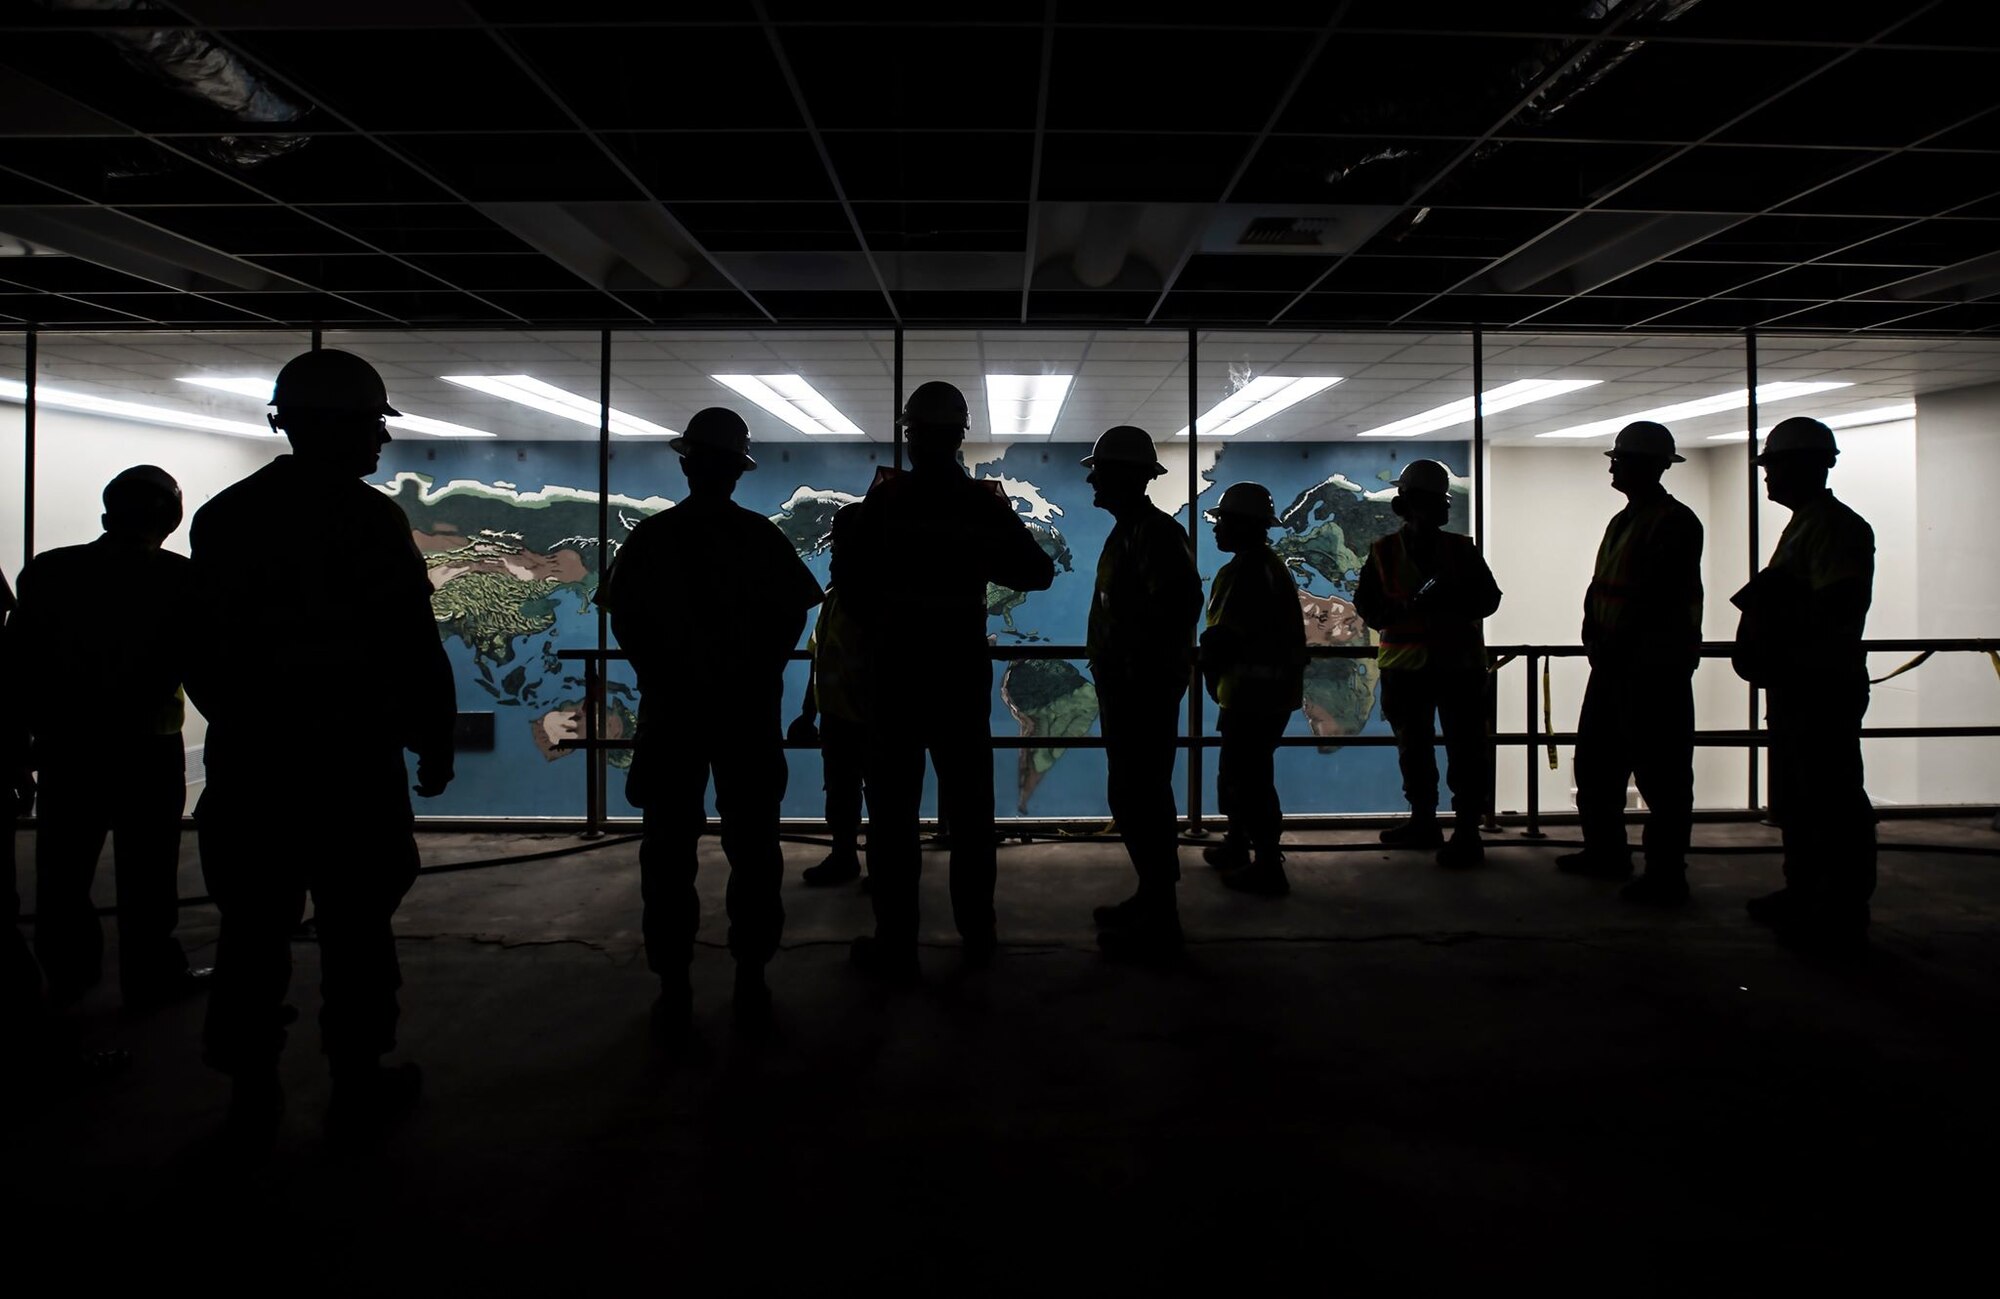 A group of military personnel in hard hats are silhouetted against the brightly lit room in front of them with a map of the world on the wall